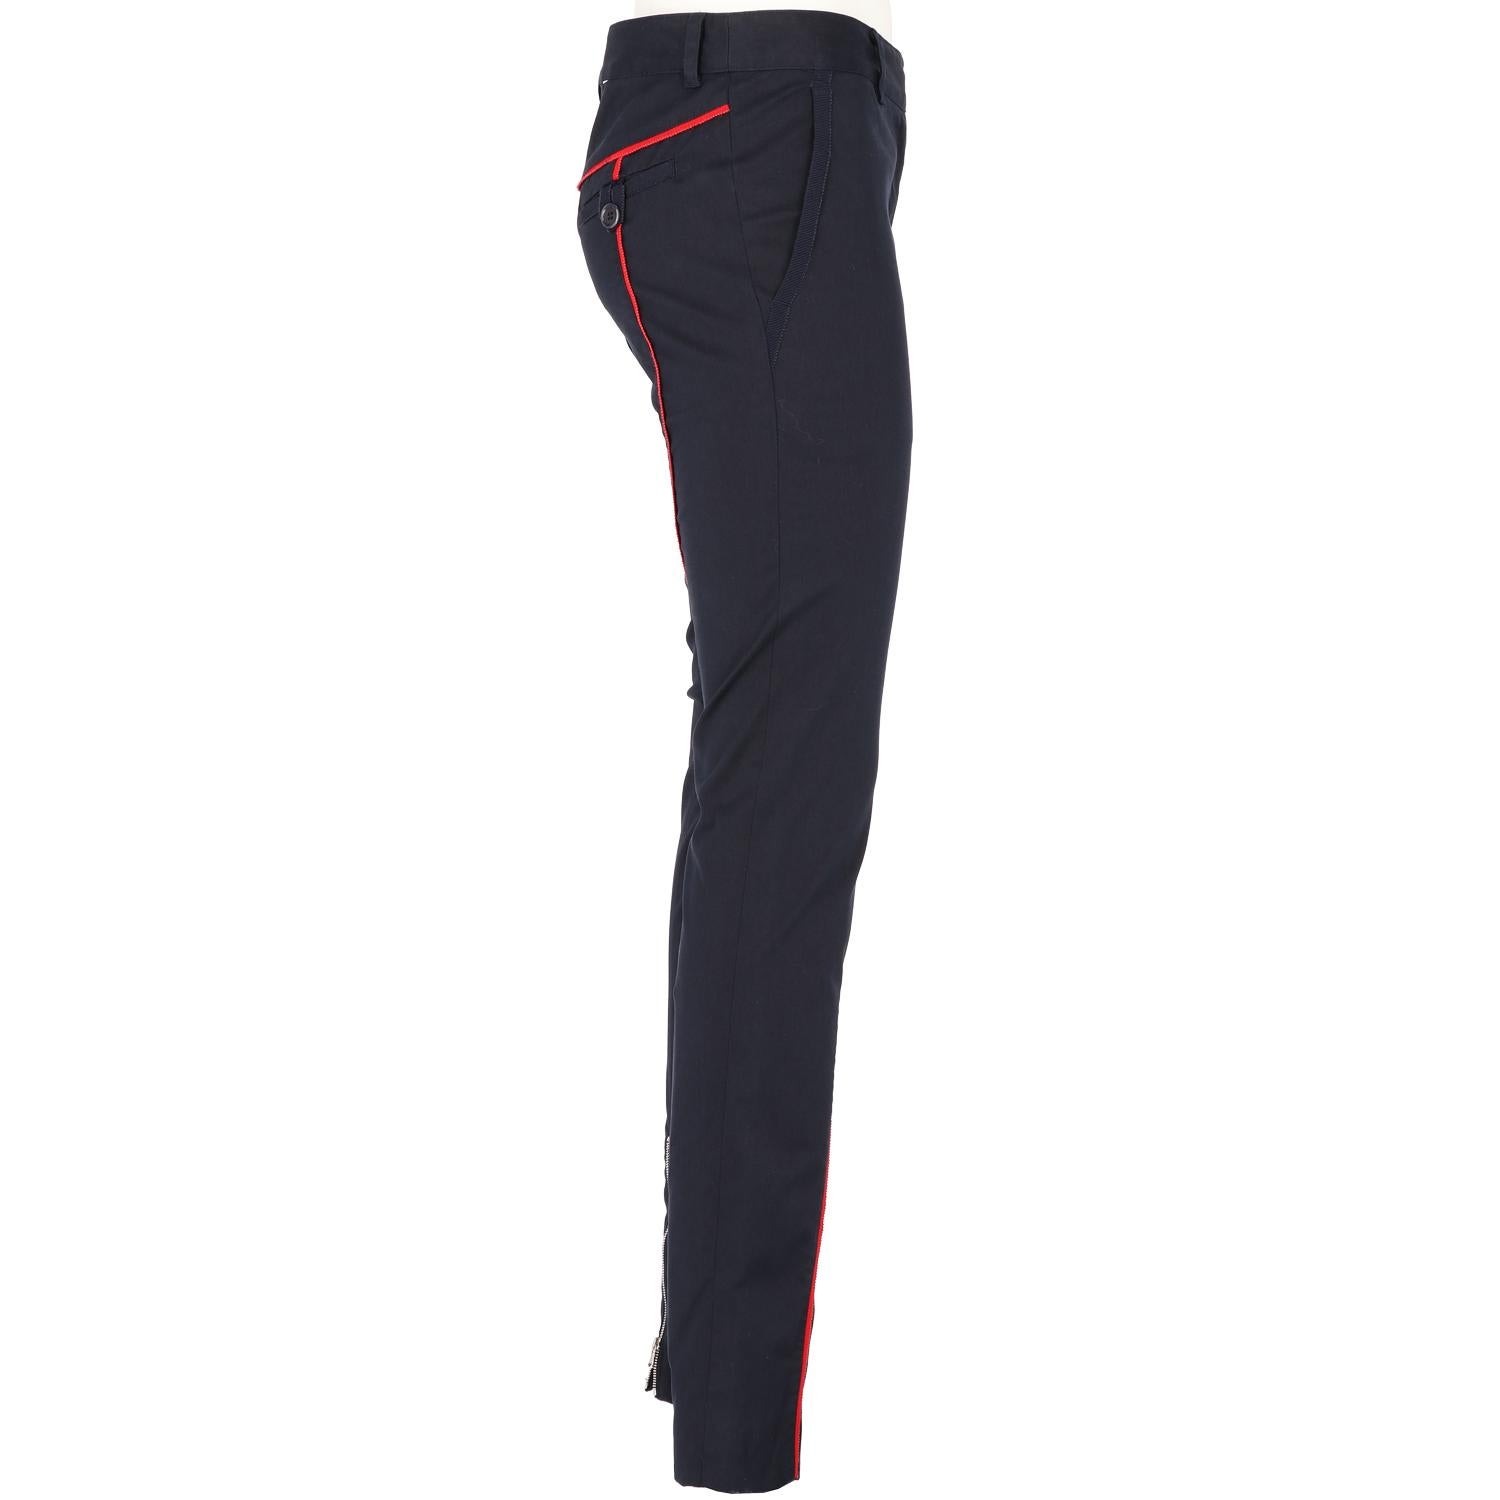 Moschino Cheap and Chic carrot trousers in dark blue cotton blend with contrasting red inserts on the legs and back.
Zip details on the bottom.

Years: 2000s

Made in Italy

Size: 42 IT

Linear measures

Height: 102 cm
Waist: 42 cm